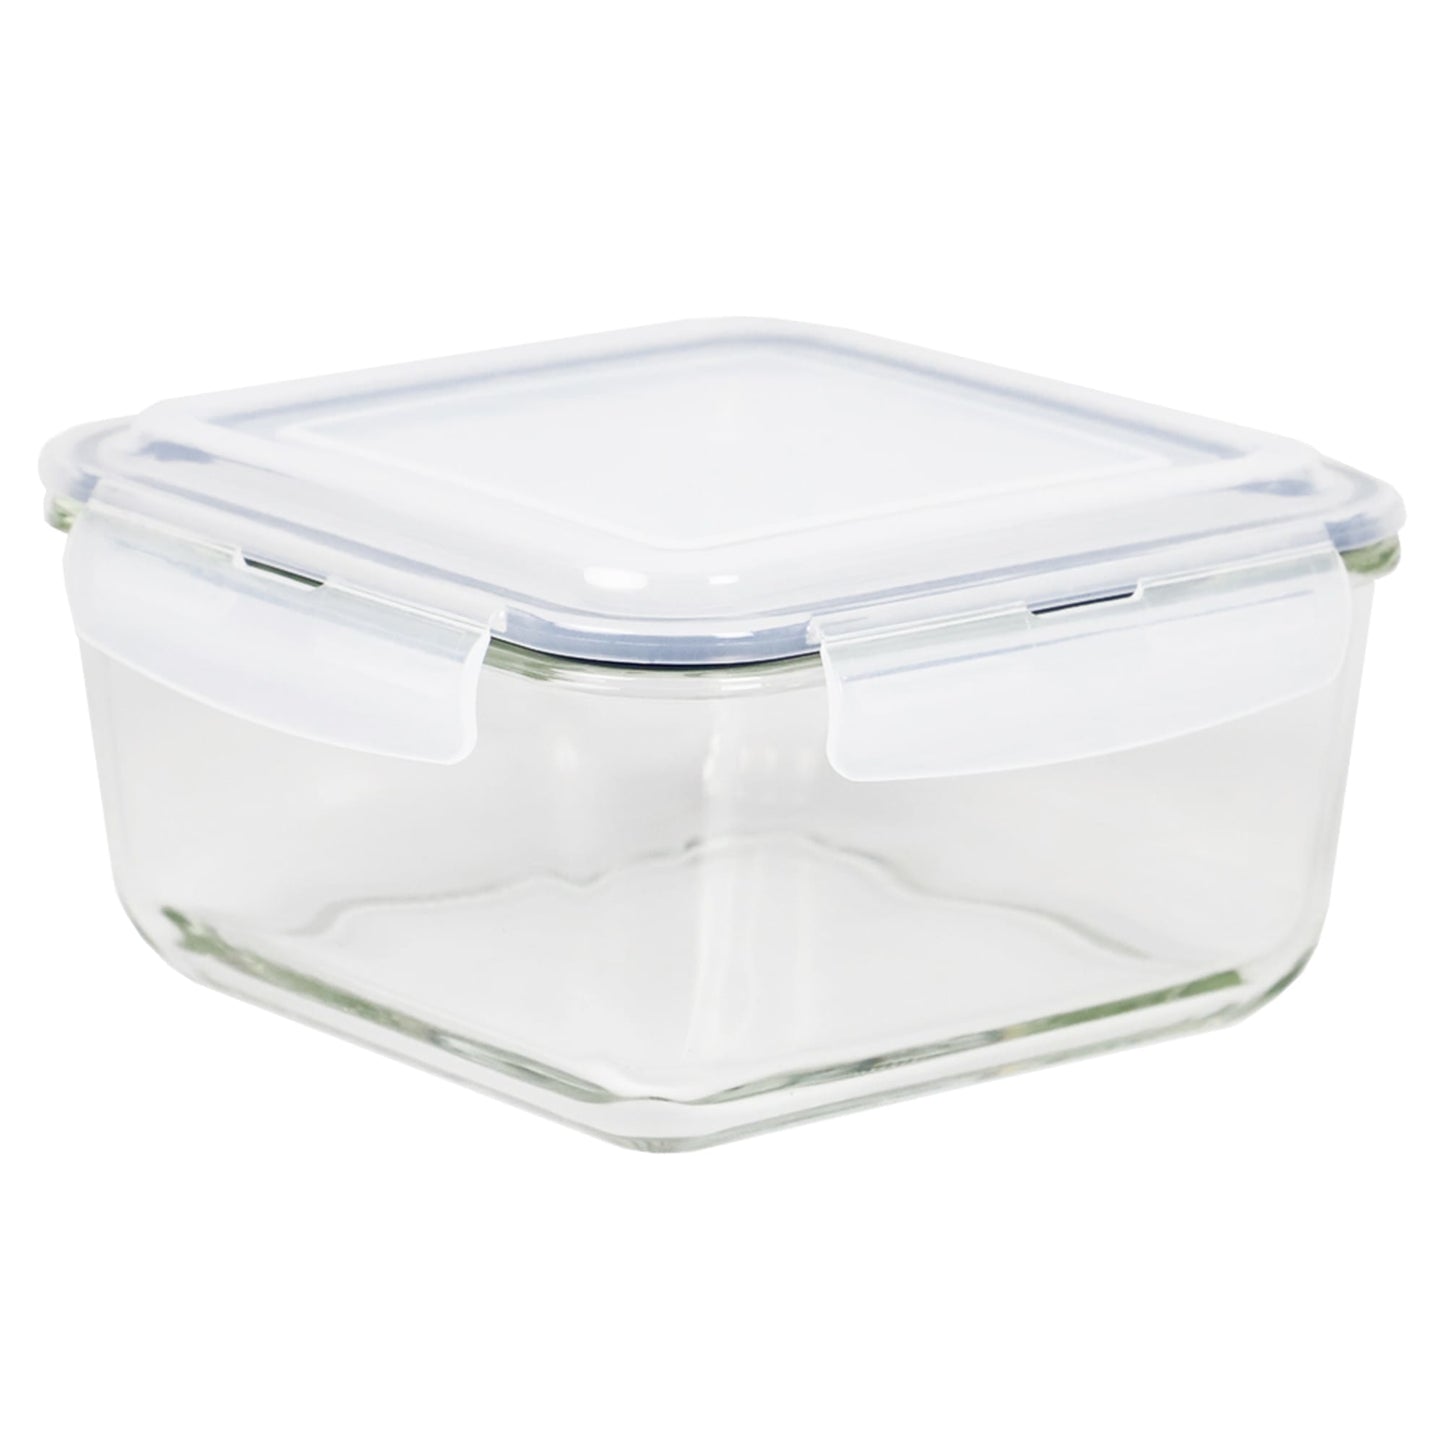 Michael Graves Design 74 Ounce High Borosilicate Glass Square Food Storage Container with Indigo Rubber Seal